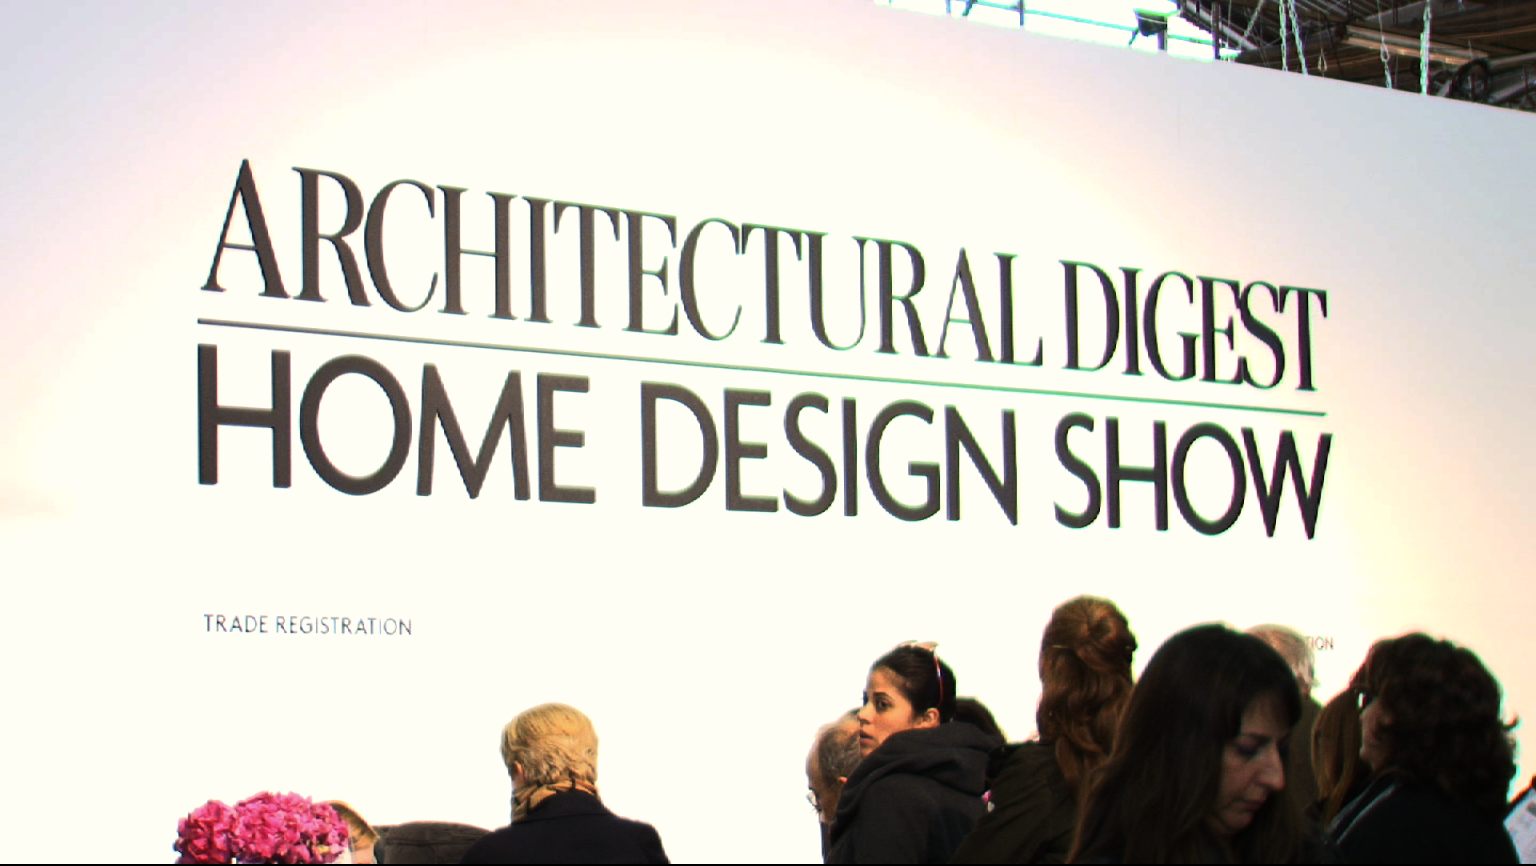 Trends from the 12th Annual Architectural Digest Home Design Show